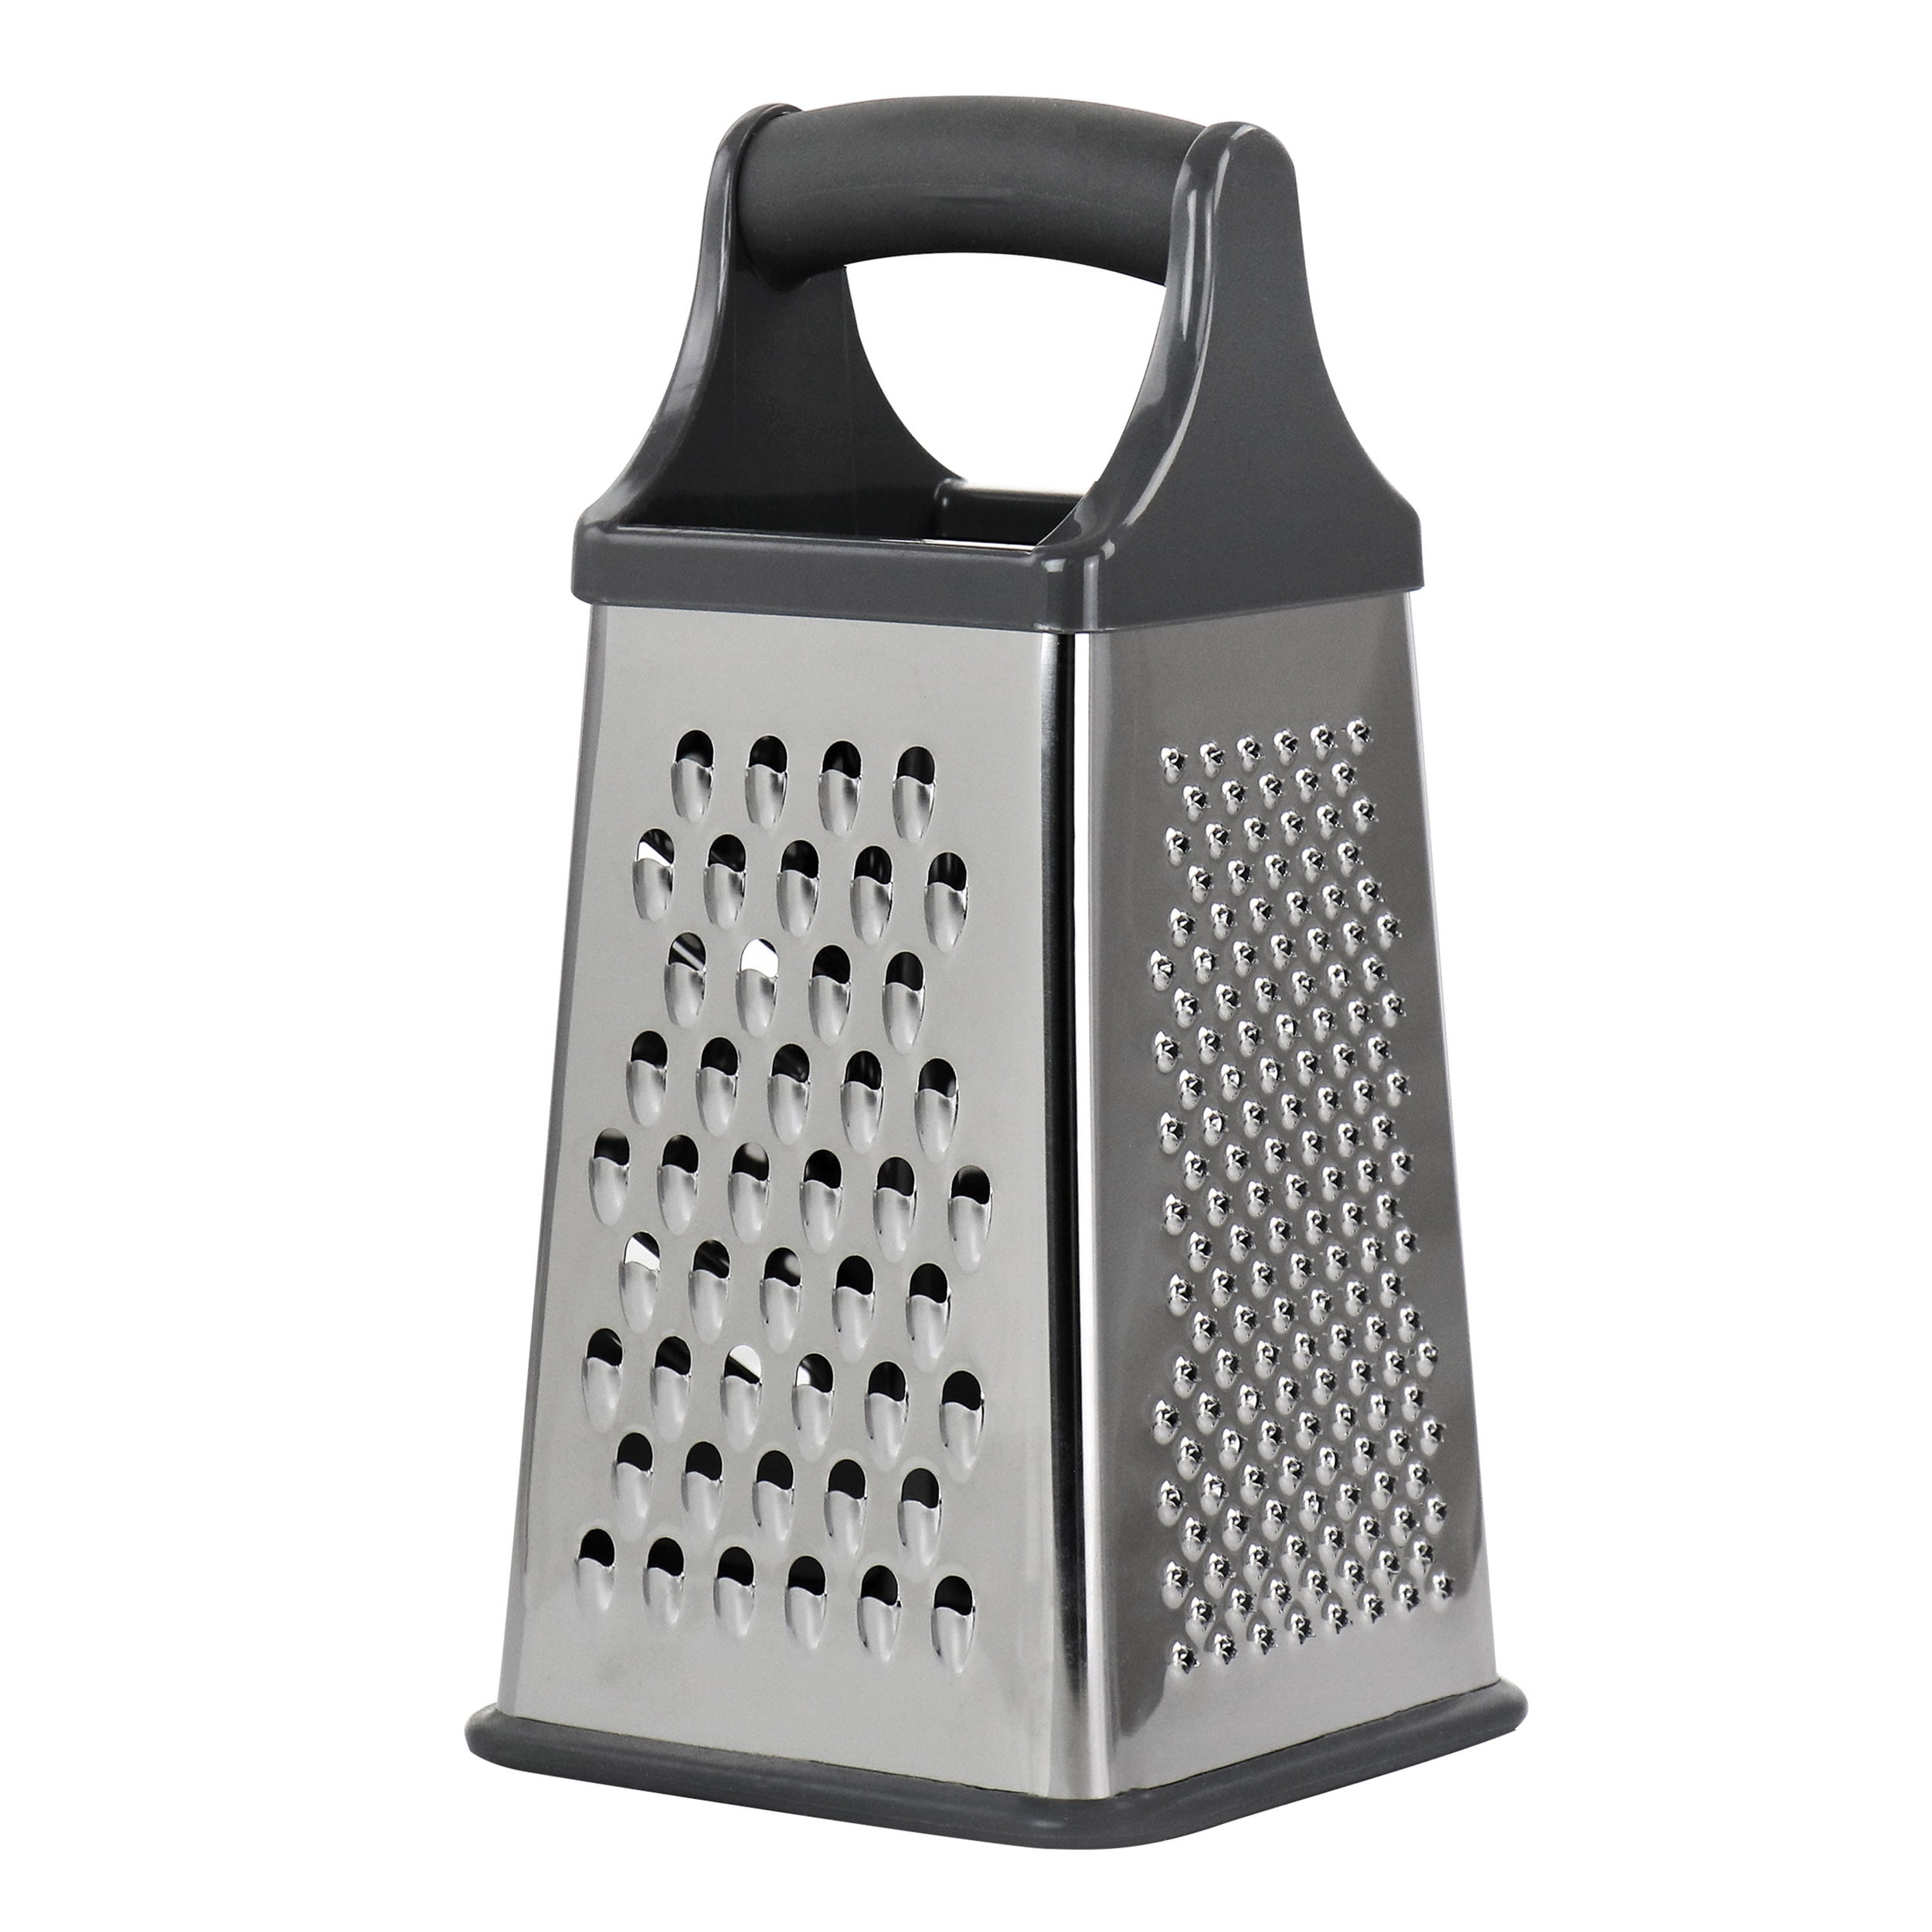 ColorLife Box Grater Set Of 5, 4-Sided Stainless Steel Cheese